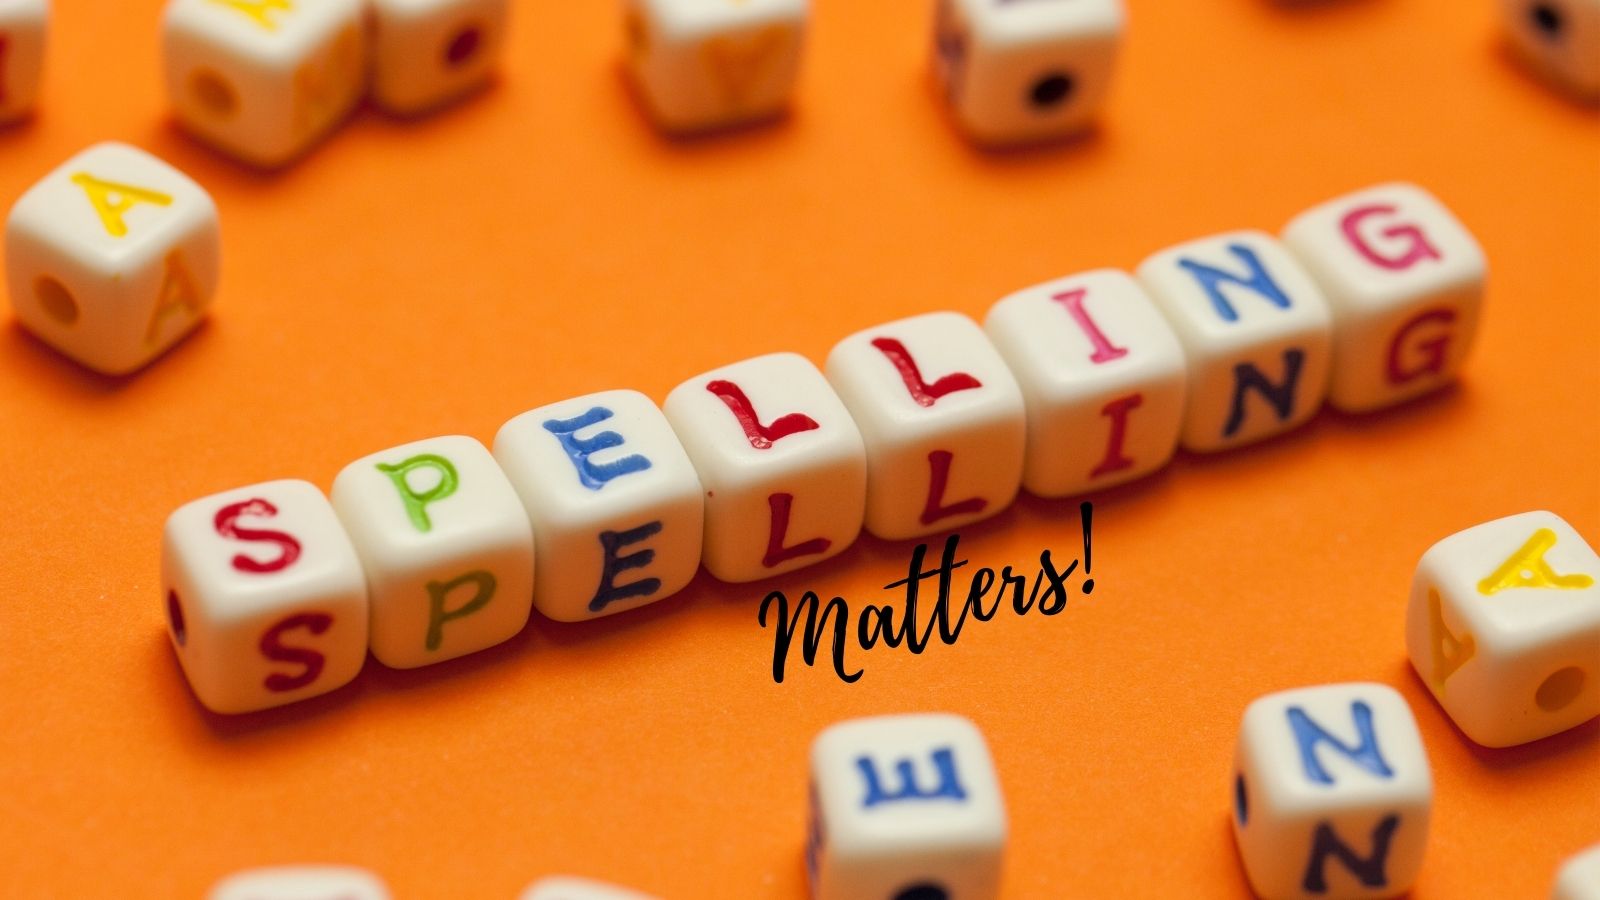 spelling matters on blog categories and tags